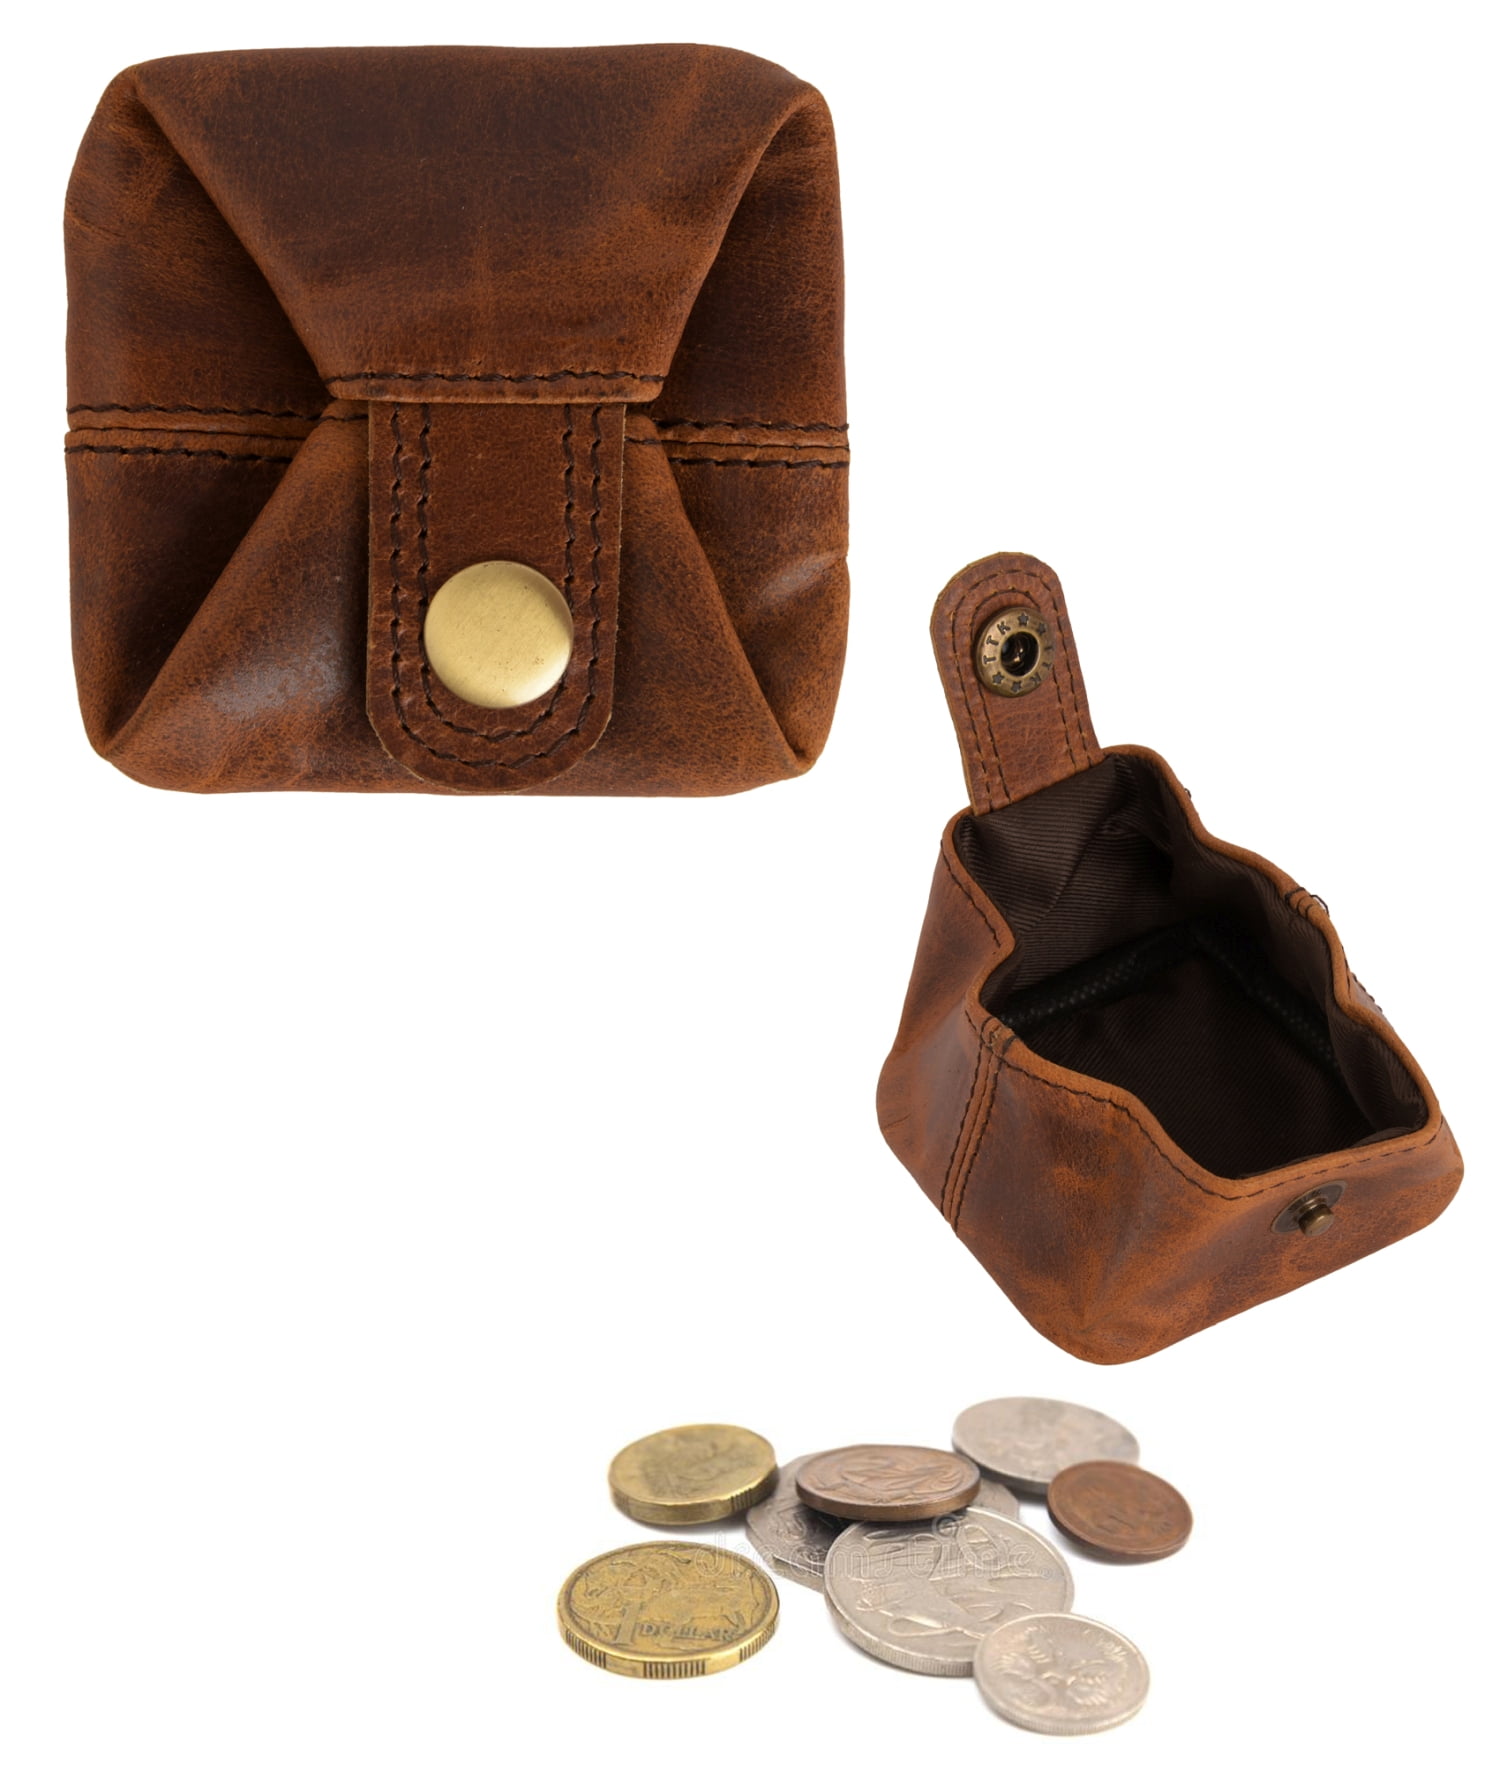 Retro Mini Zipper Mens Purses Leather For Men And Women Genuine Leather  Pocket Purse With Key Holder, Coin Pocket, And Change Purge From  Soeasyshopping, $13 | DHgate.Com